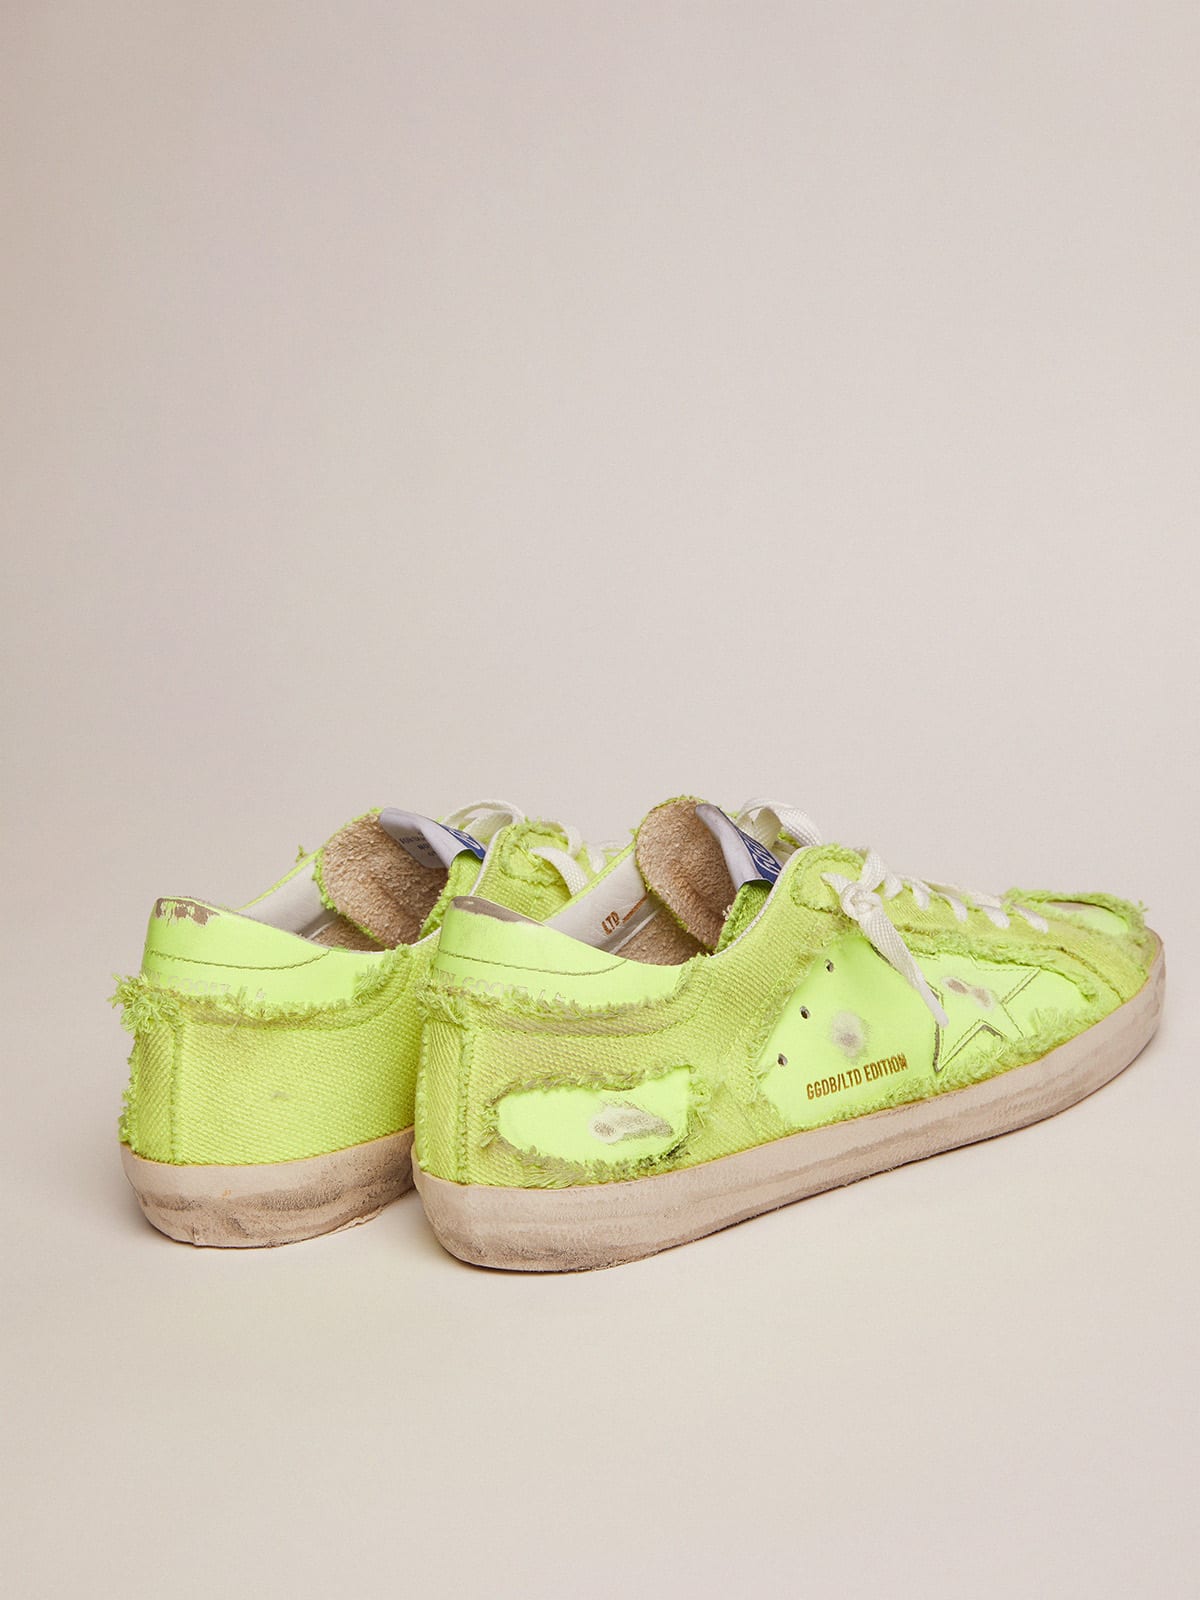 Golden Goose - Men’s Super-Star LAB sneakers in fluorescent yellow leather and canvas in 